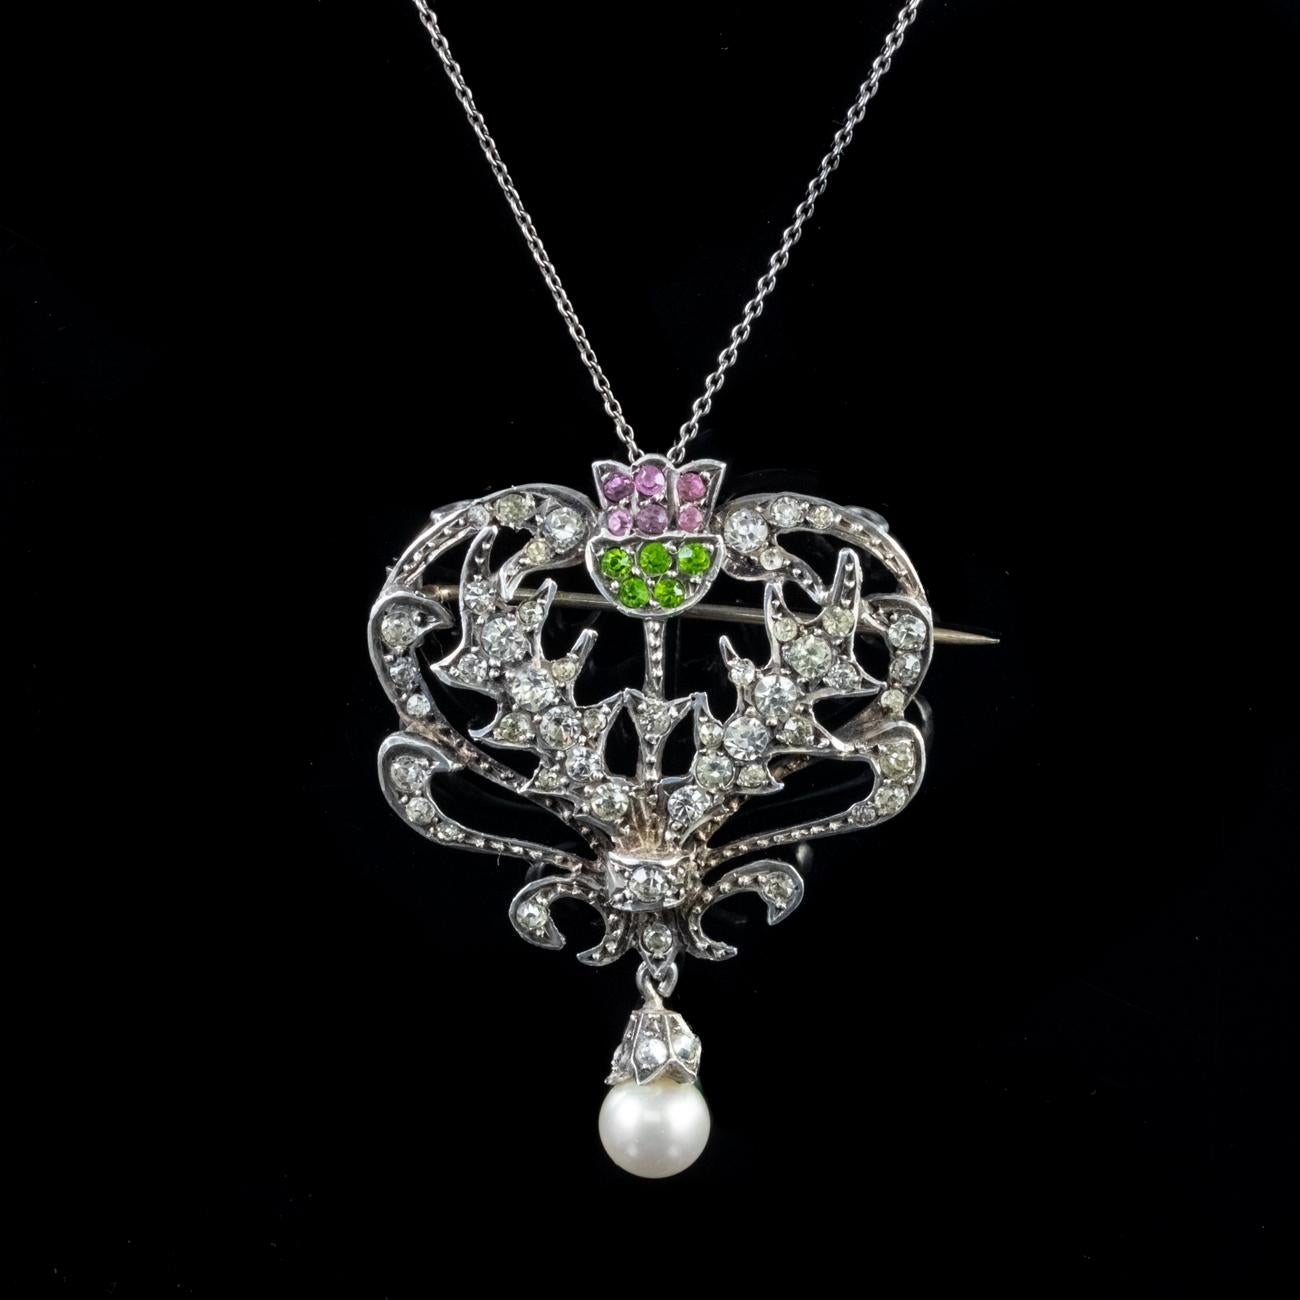 This stunning Antique Edwardian Scottish Suffragette necklace and pendant has been commissioned in Sterling Silver. The pendant features a Scottish thistle shaped design and has been set with an array of Paste stones which are coloured green, white